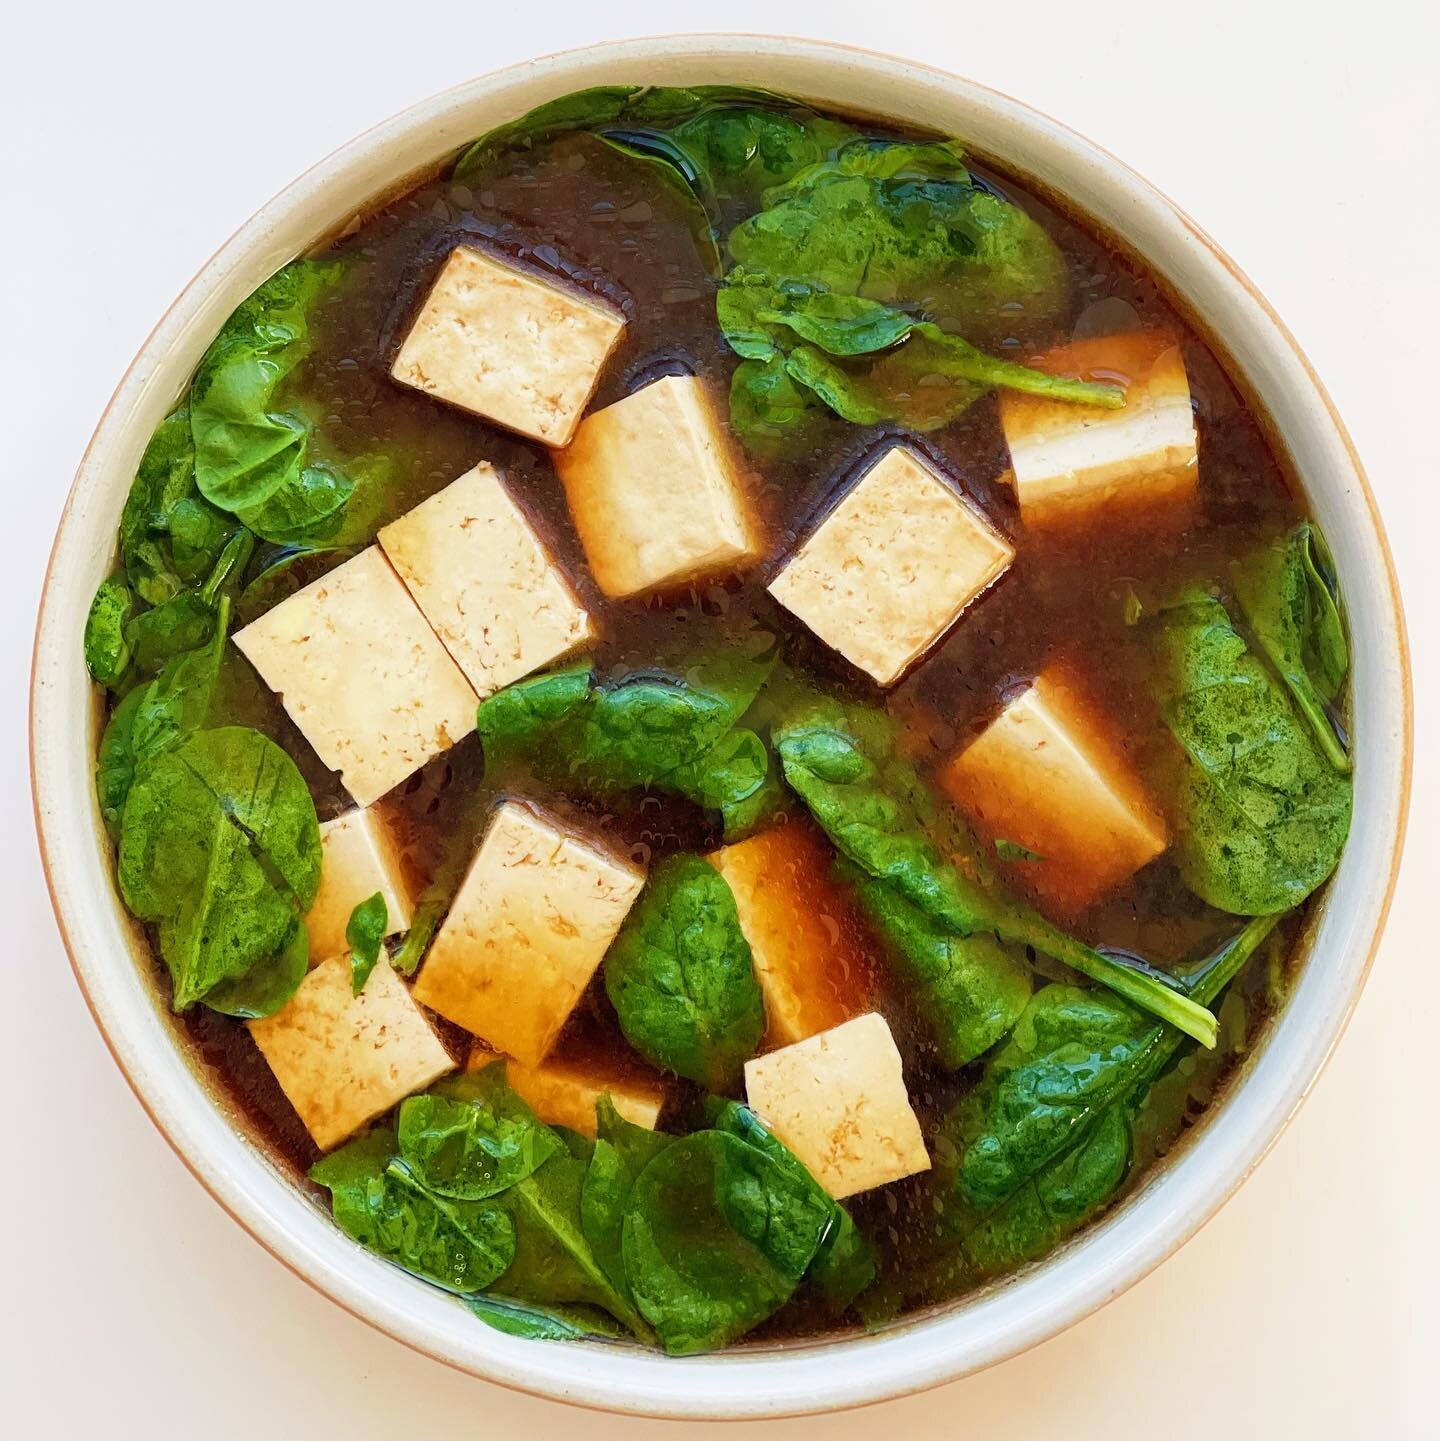 Brrrrrr! Another warming bowl for me. Super quick and easy miso soup - homemade and very fast! Little miso, little kombu, little bonito. Smoky and savory! Big blocks of creamy tofu cooked right in the broth. I used medium firm (instead of my usual EX